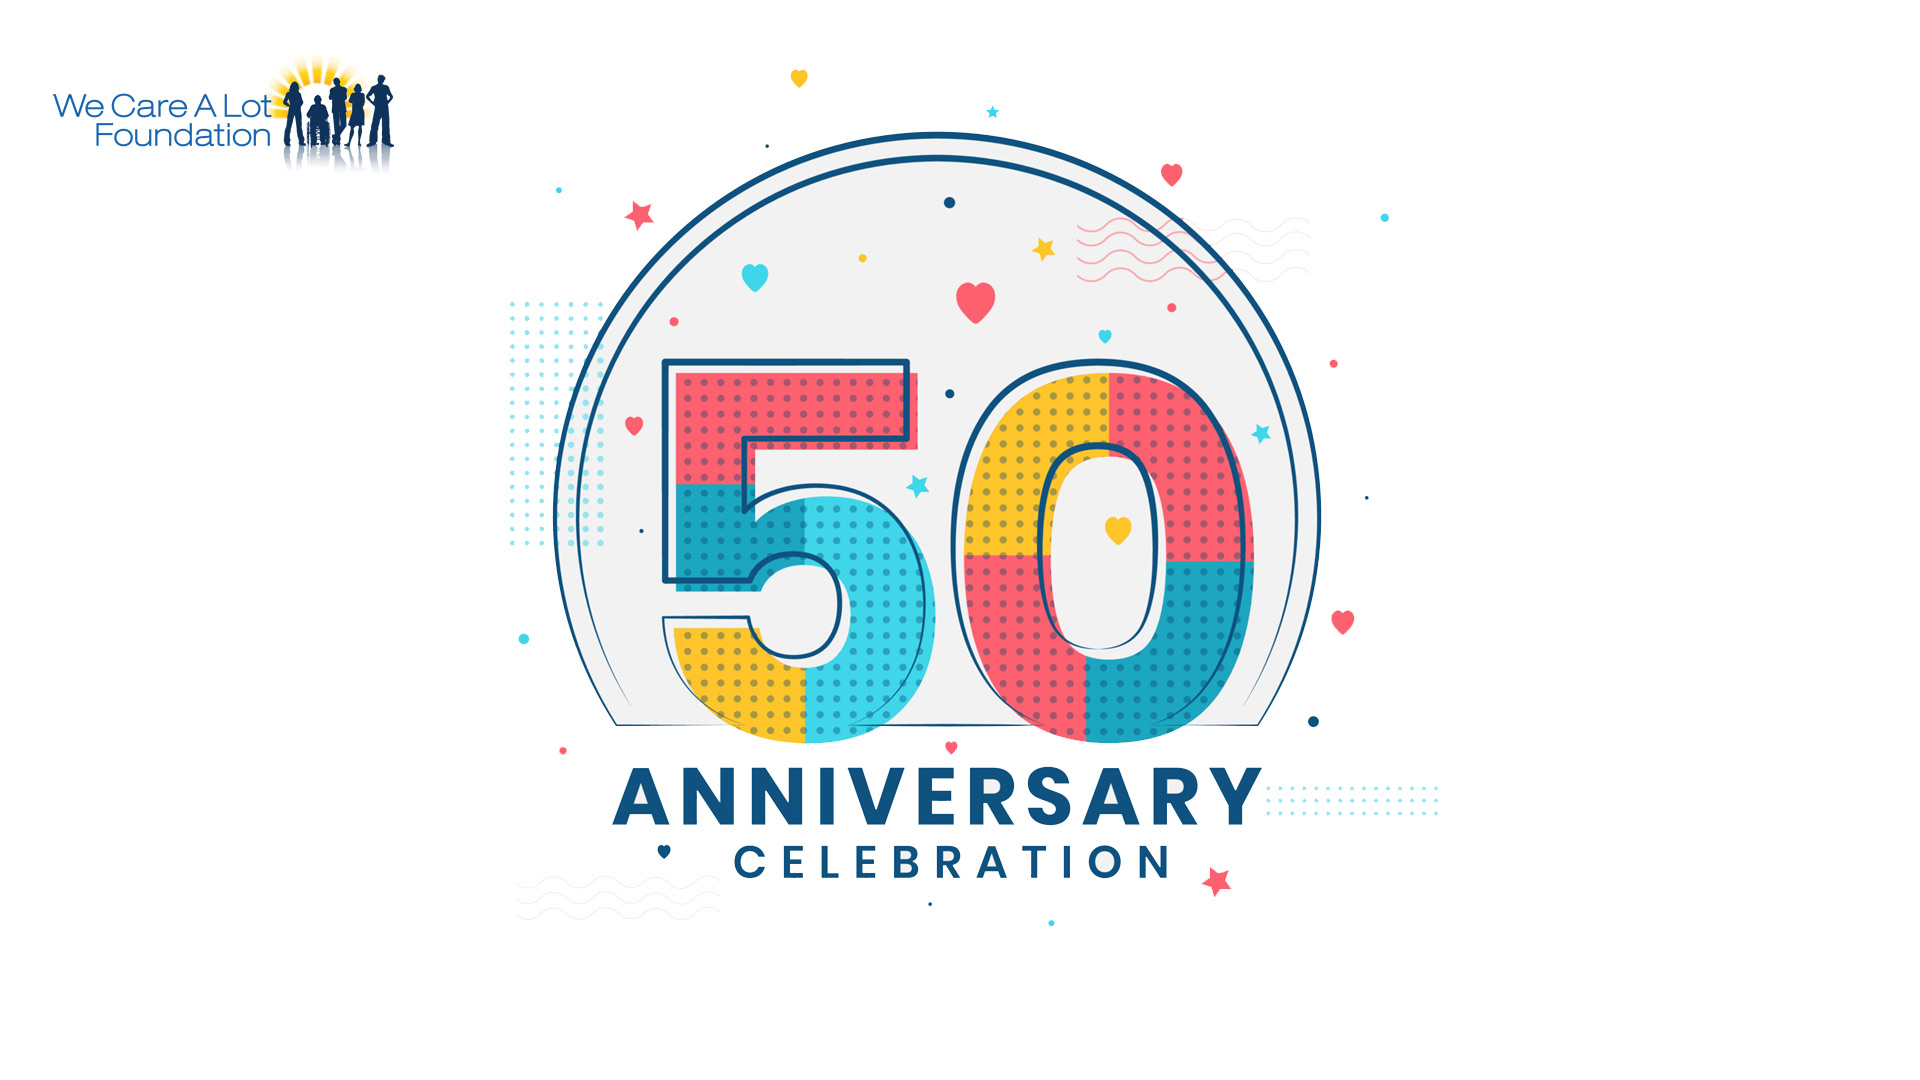 Our 50th Anniversary!